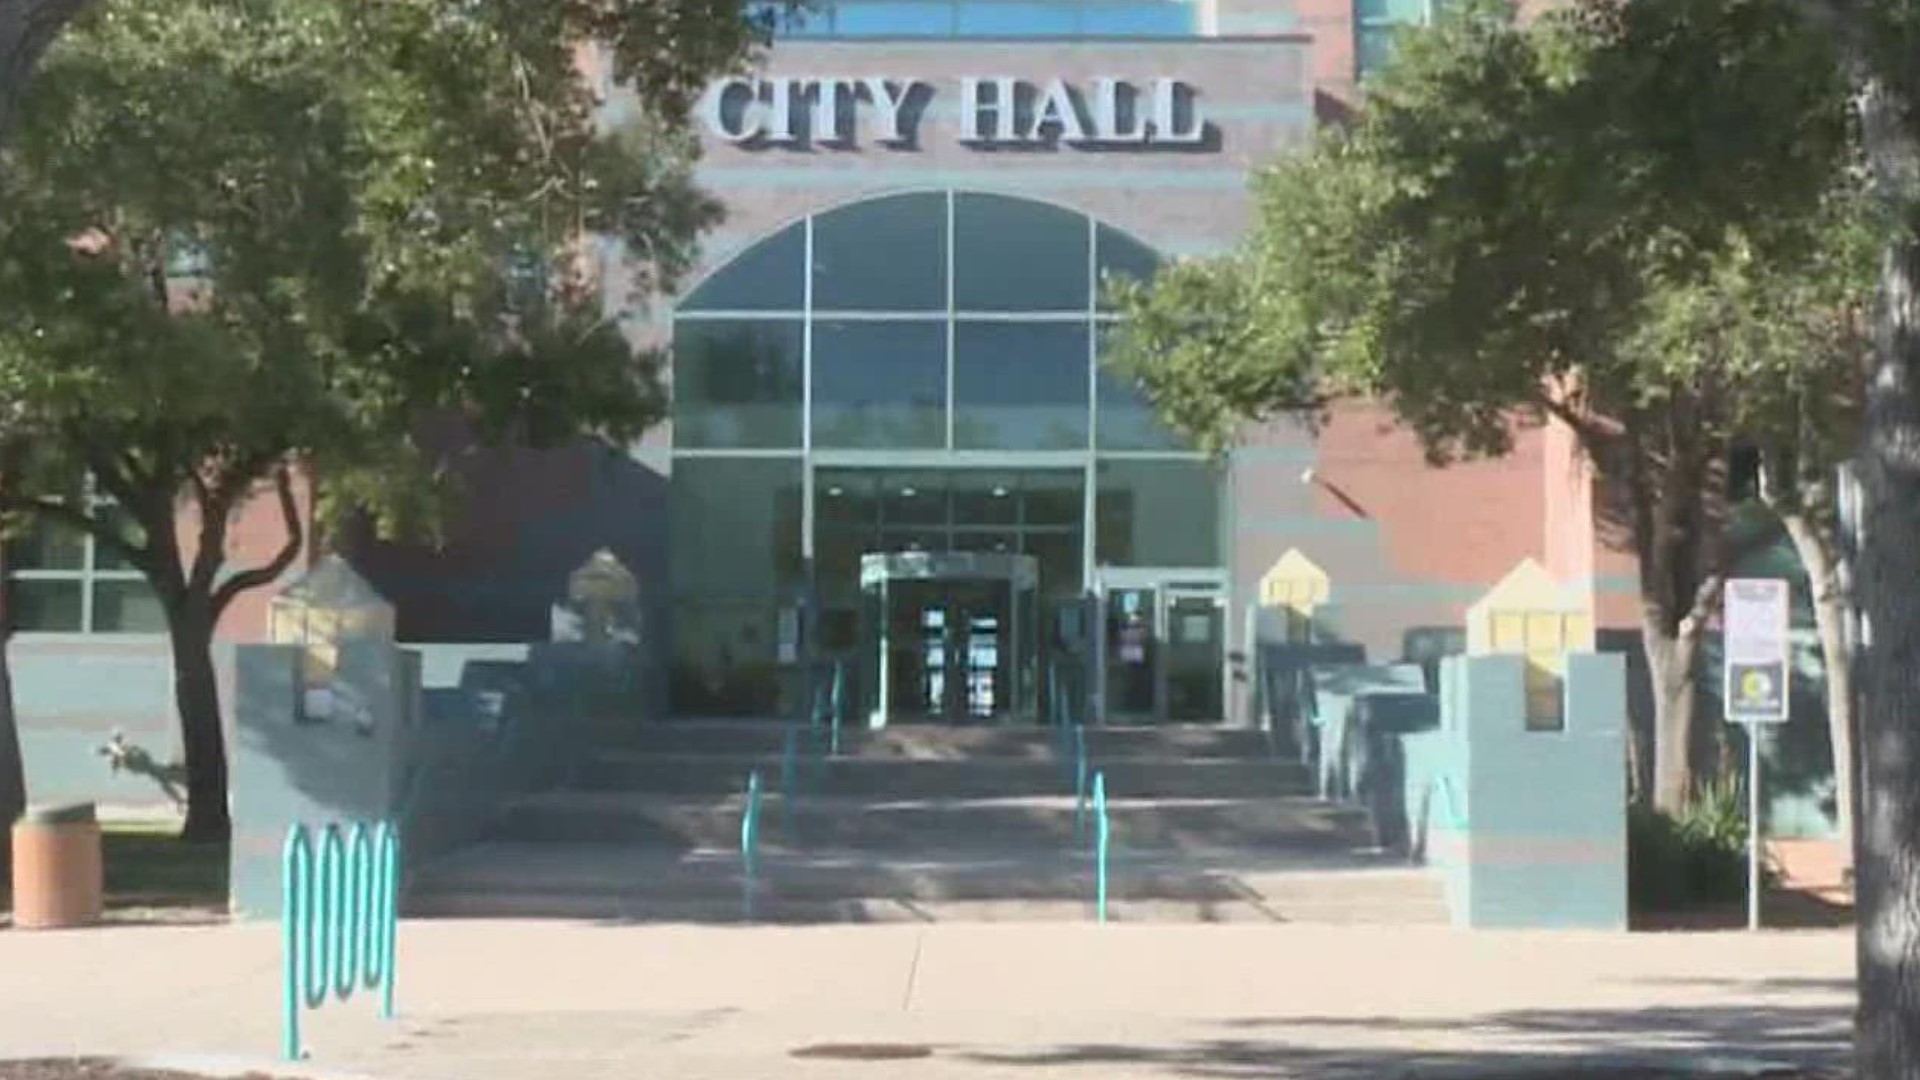 While City Manager Peter Zanoni indicates that a quick agreement would give the city operational control on March 1, County Judge Barbara Canales disagrees.